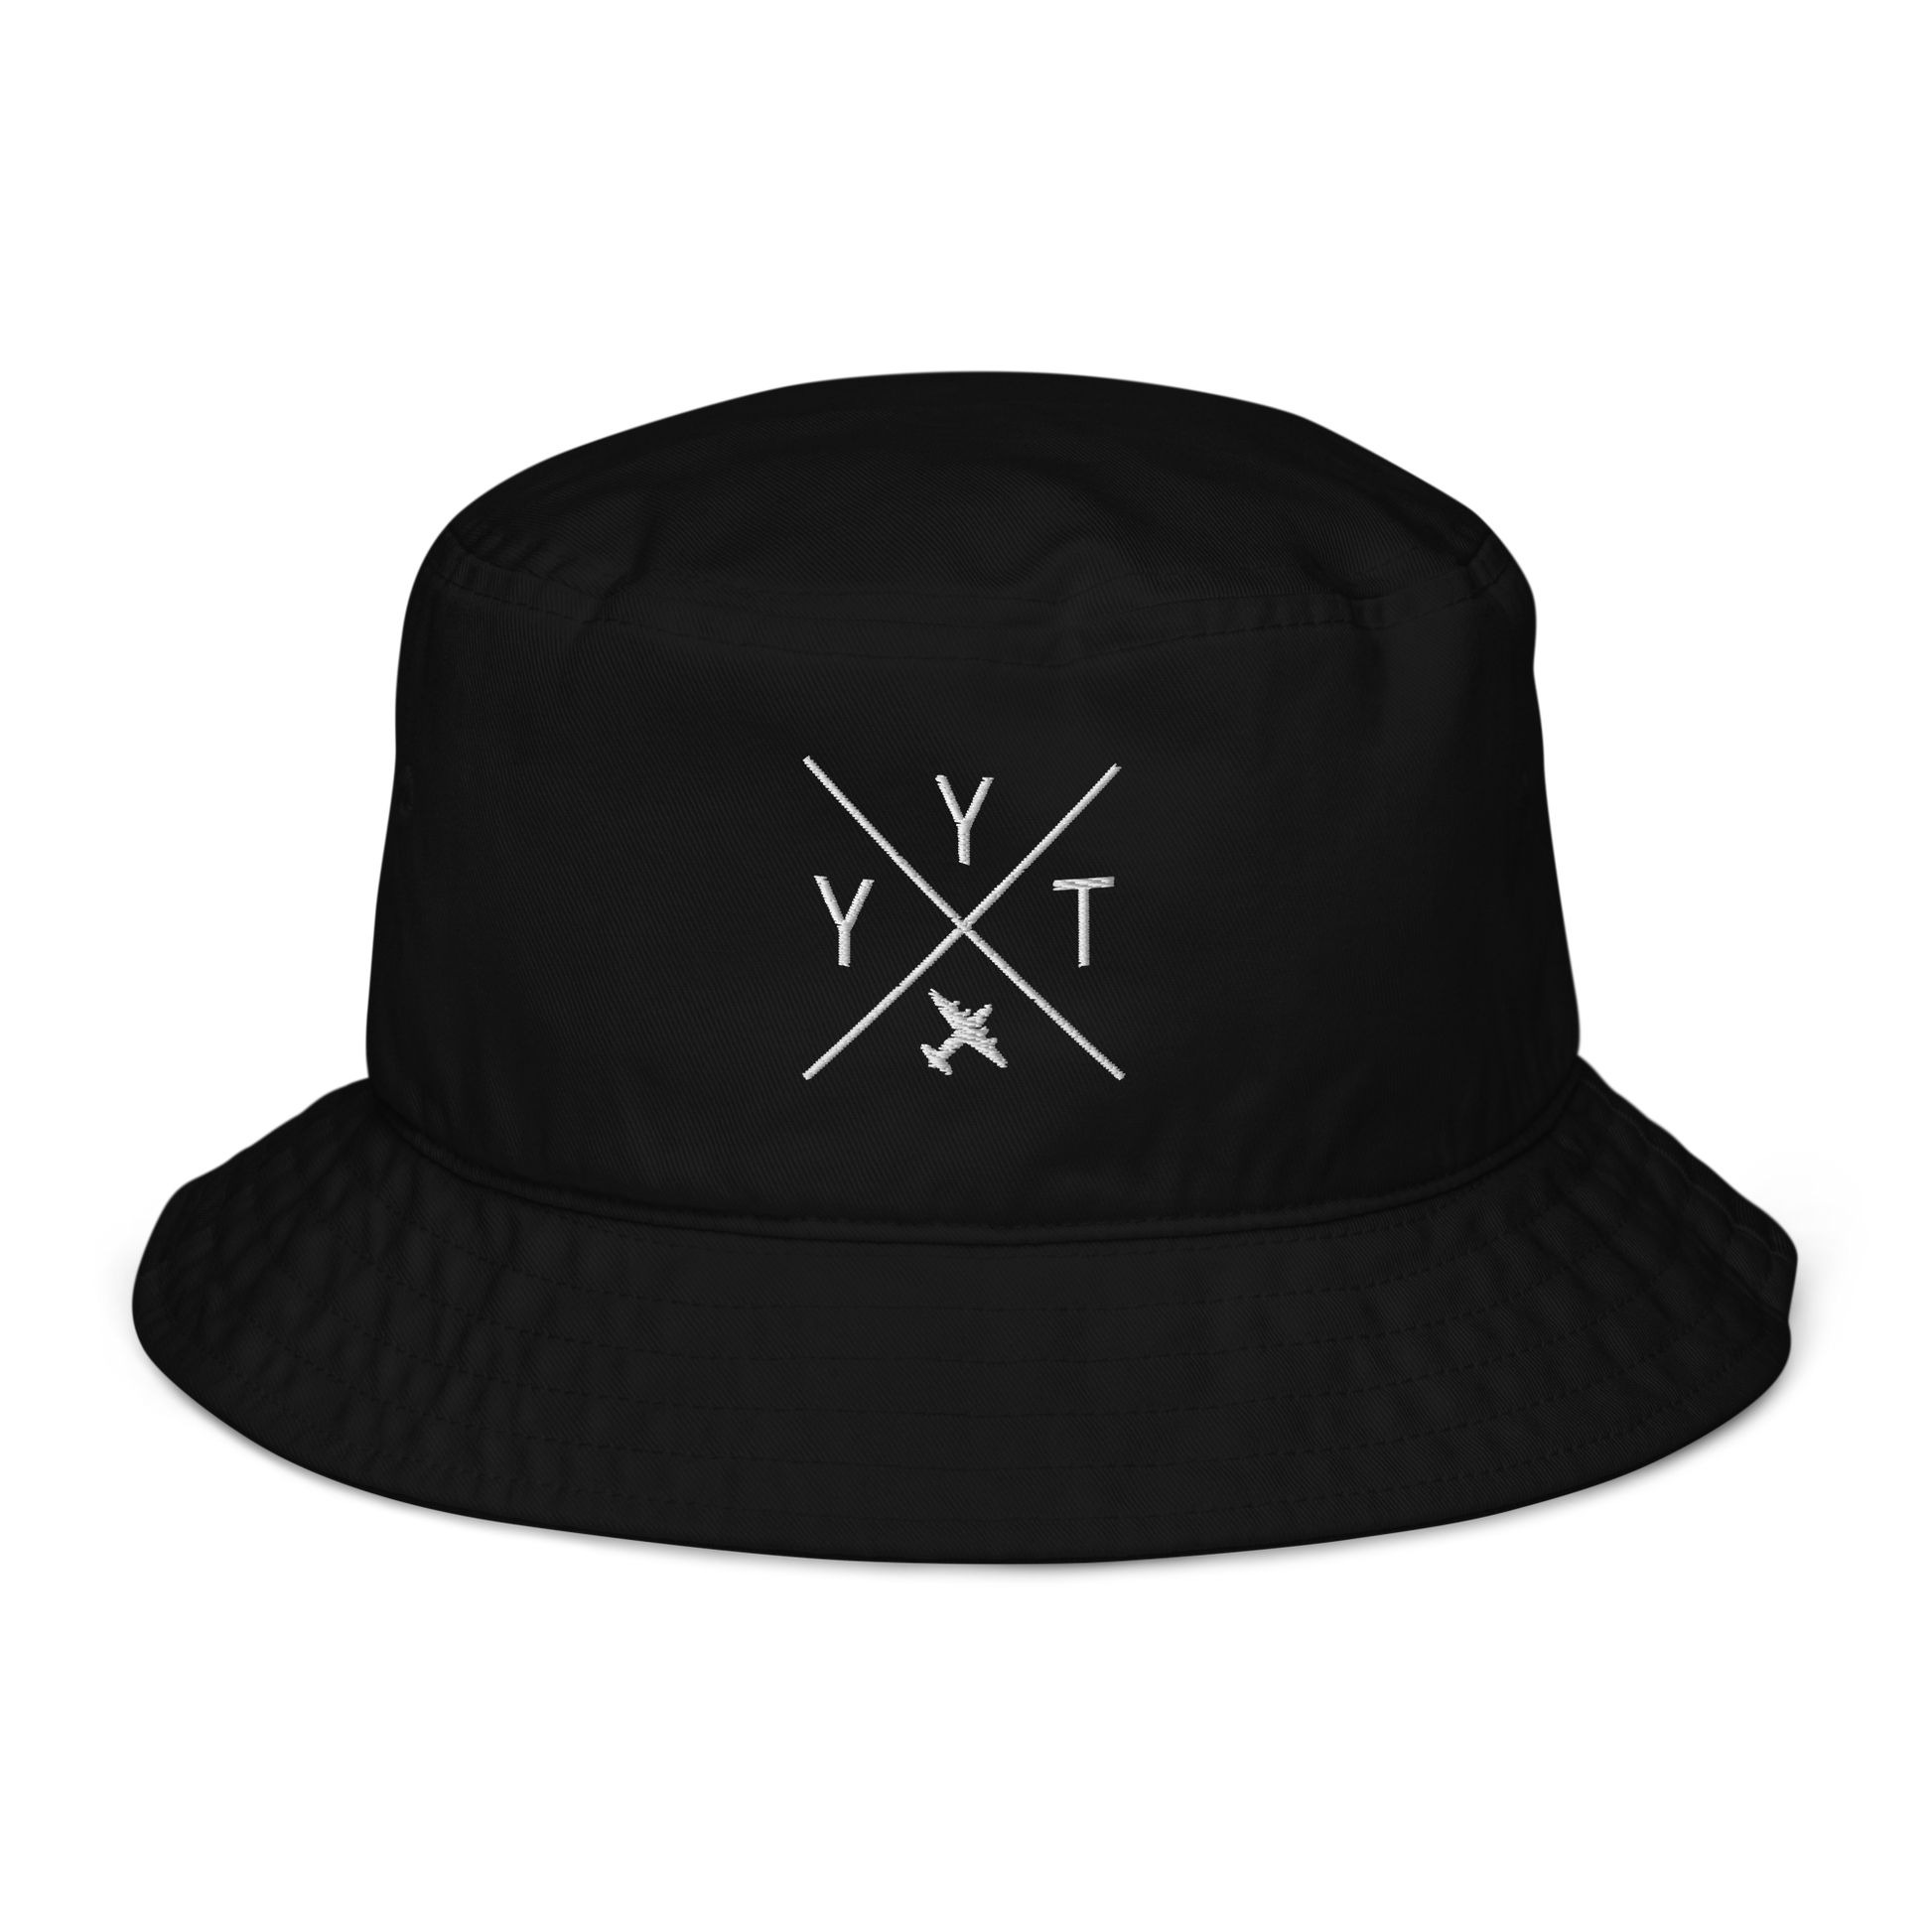 YHM Designs - YYT St. John's Organic Cotton Bucket Hat - Crossed-X Design with Airport Code and Vintage Propliner - White Embroidery - Image 01